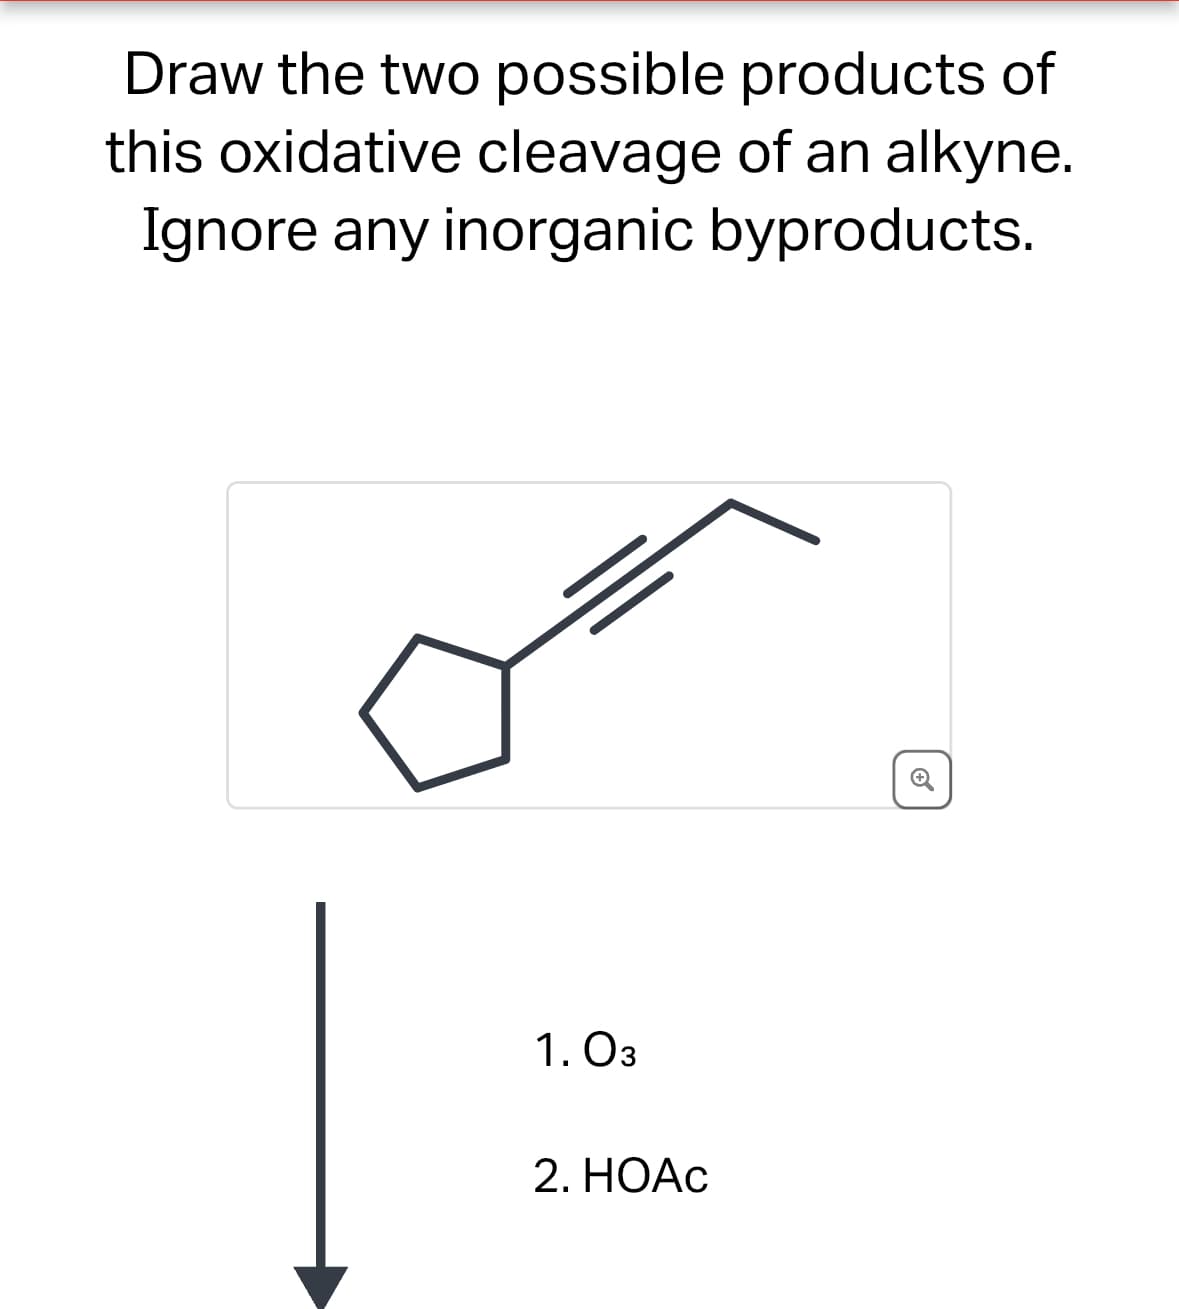 Draw the two possible products of
this oxidative cleavage of an alkyne.
Ignore any inorganic byproducts.
1. 03
2. HOAC
⑤